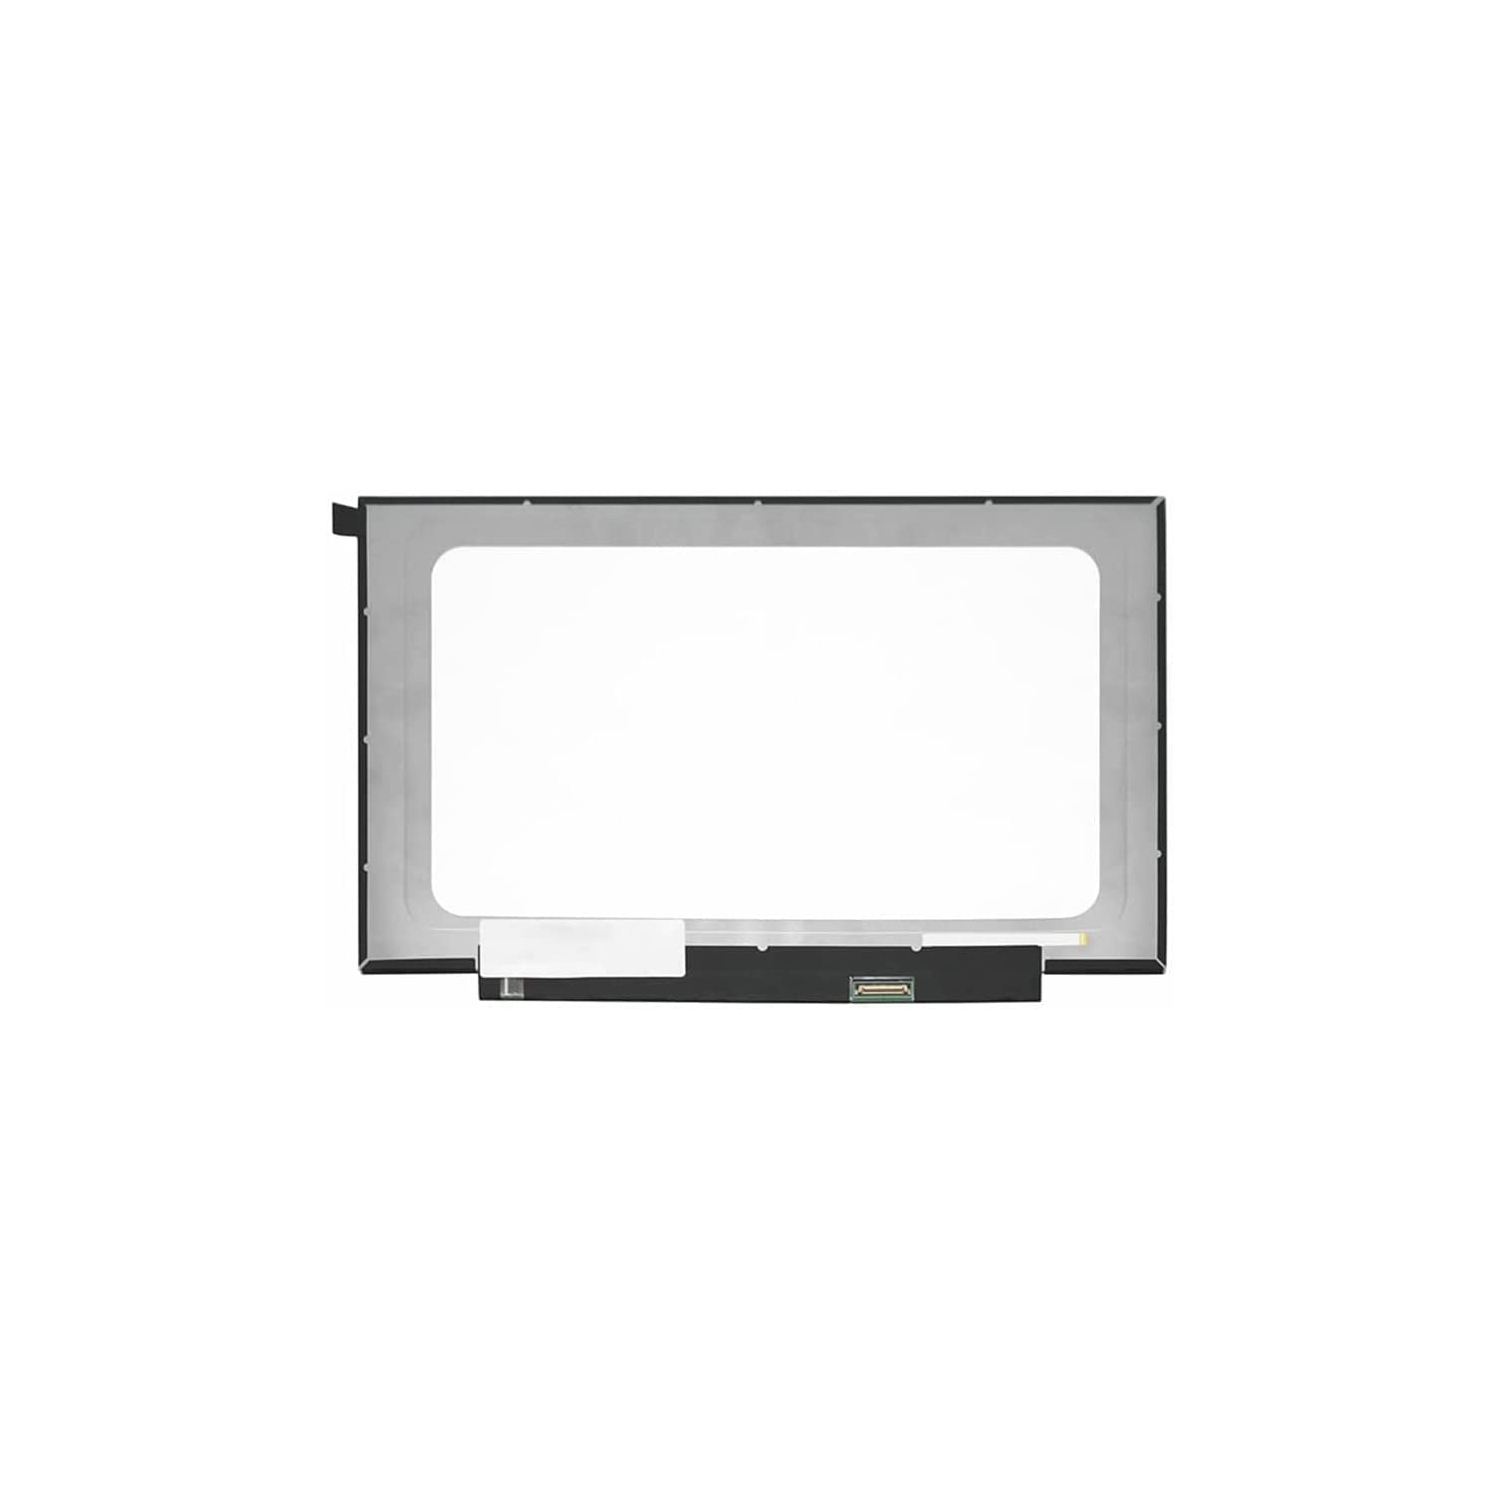 LaptopKing Replacement LCD Screen for B173HAN04.7-120HZ 17.3 inch 1920 * 1080 Resolution - Matte Open Box